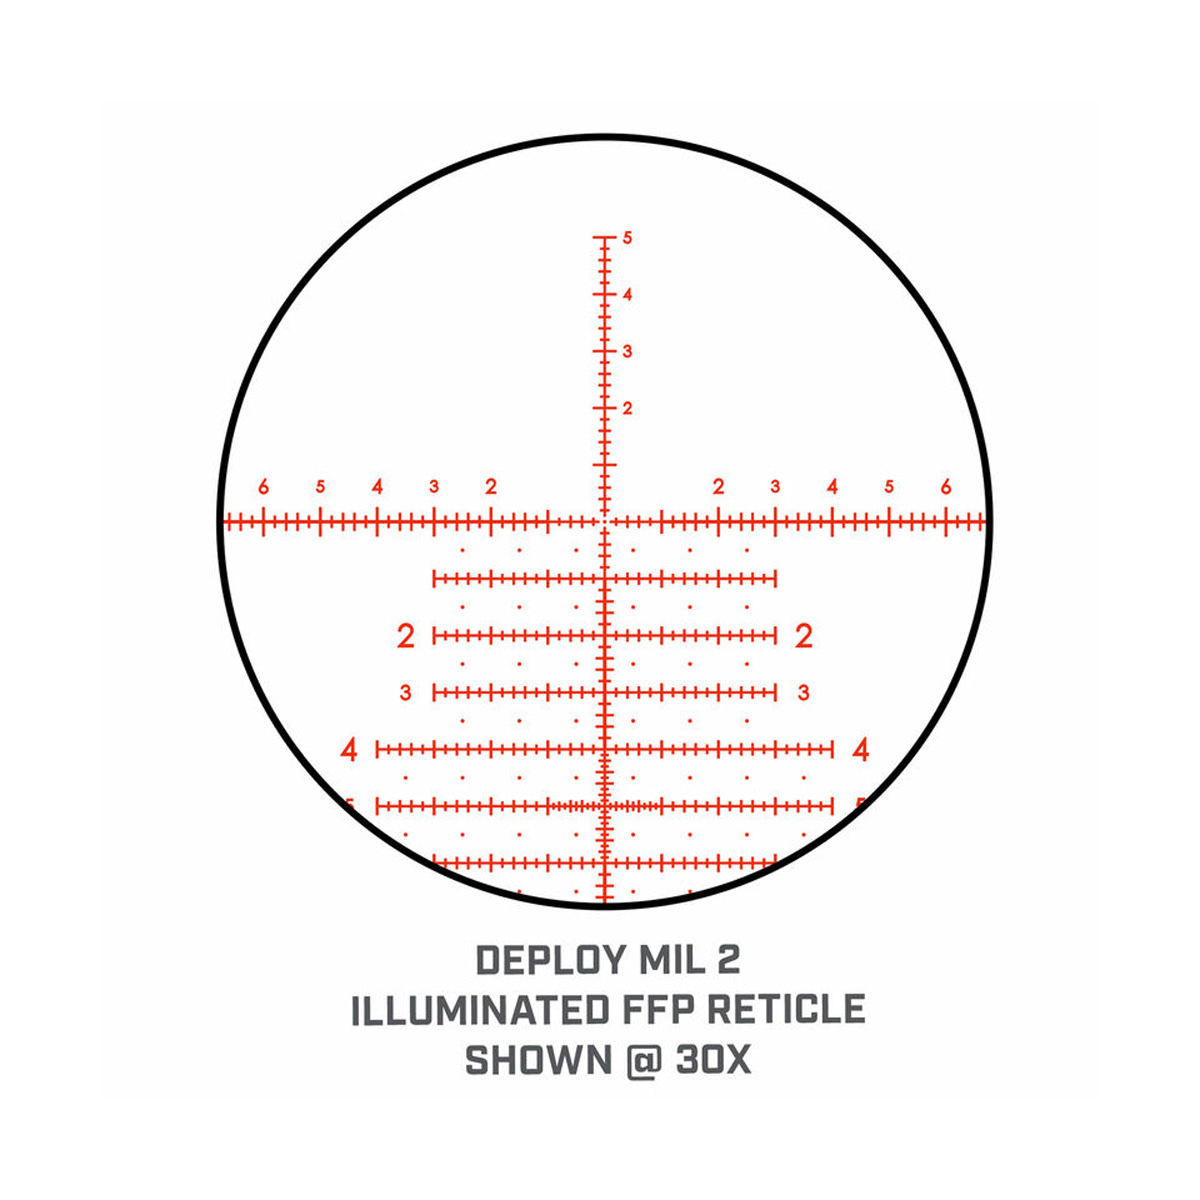 Deploy Mil 2 or DM2 reticle in the Bushnell Match Pro ED 5-30x56mm